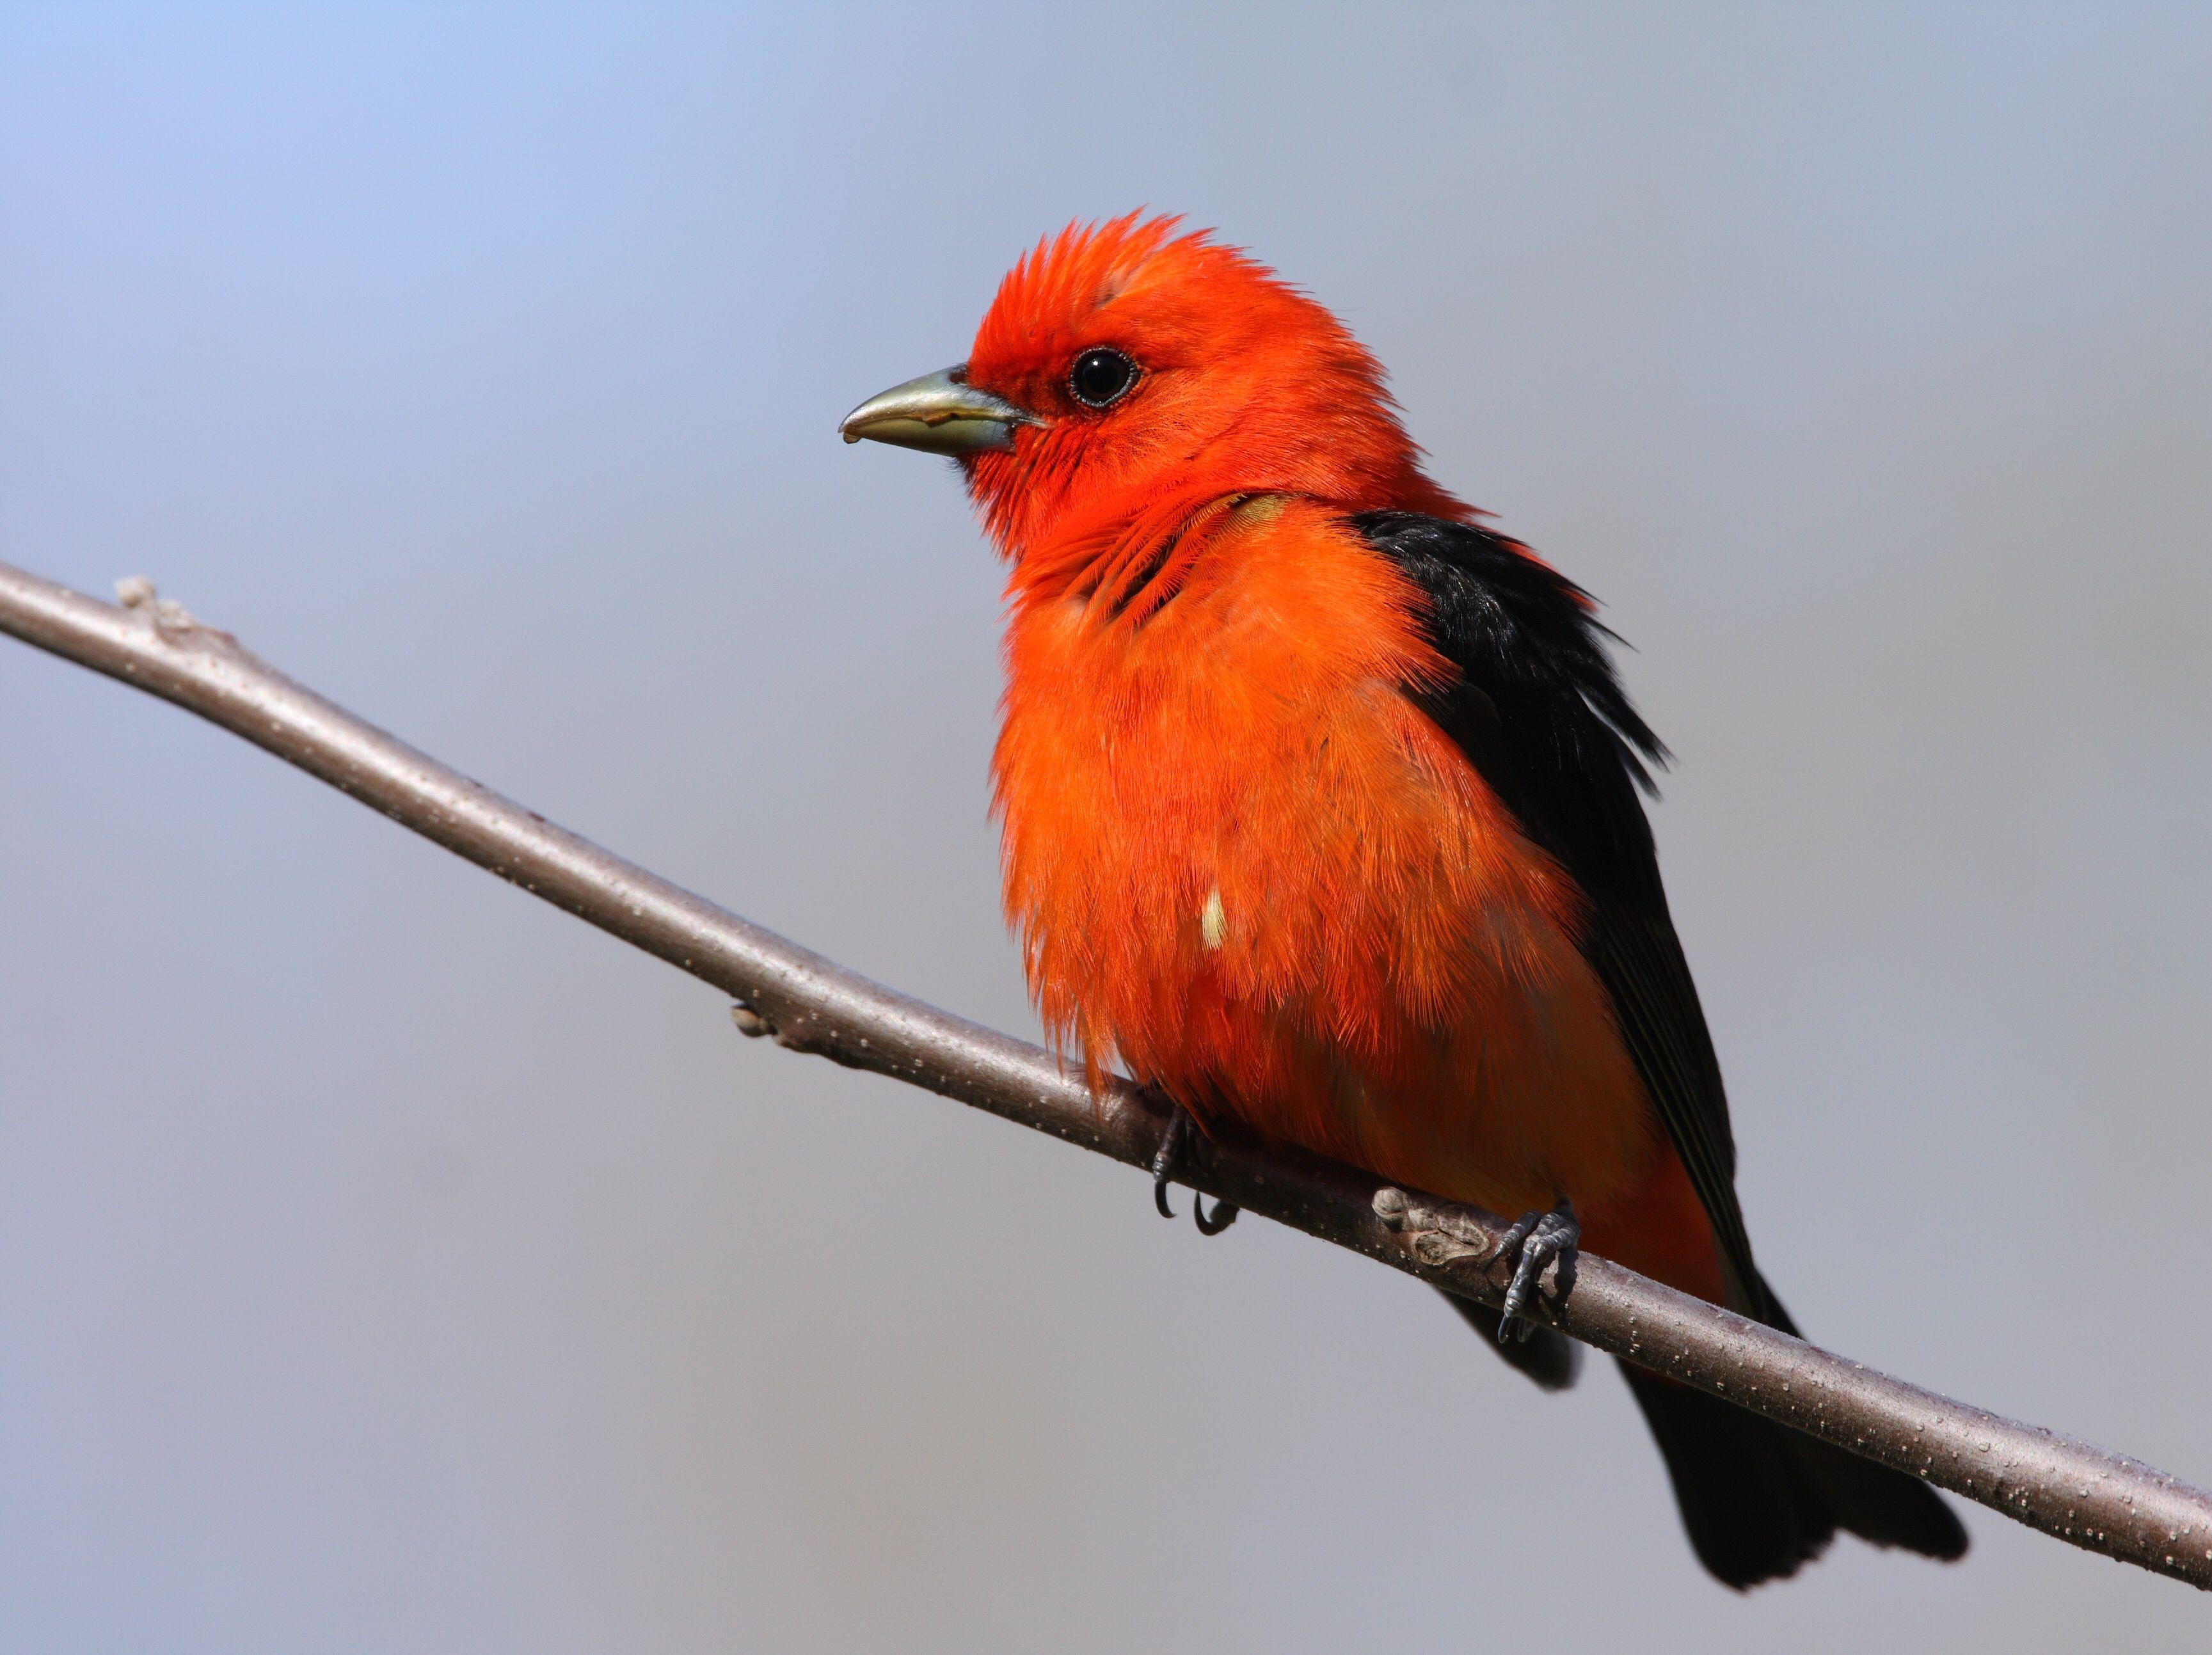 Black and Red Bird Logo - Focus on the Scarlet Tanager